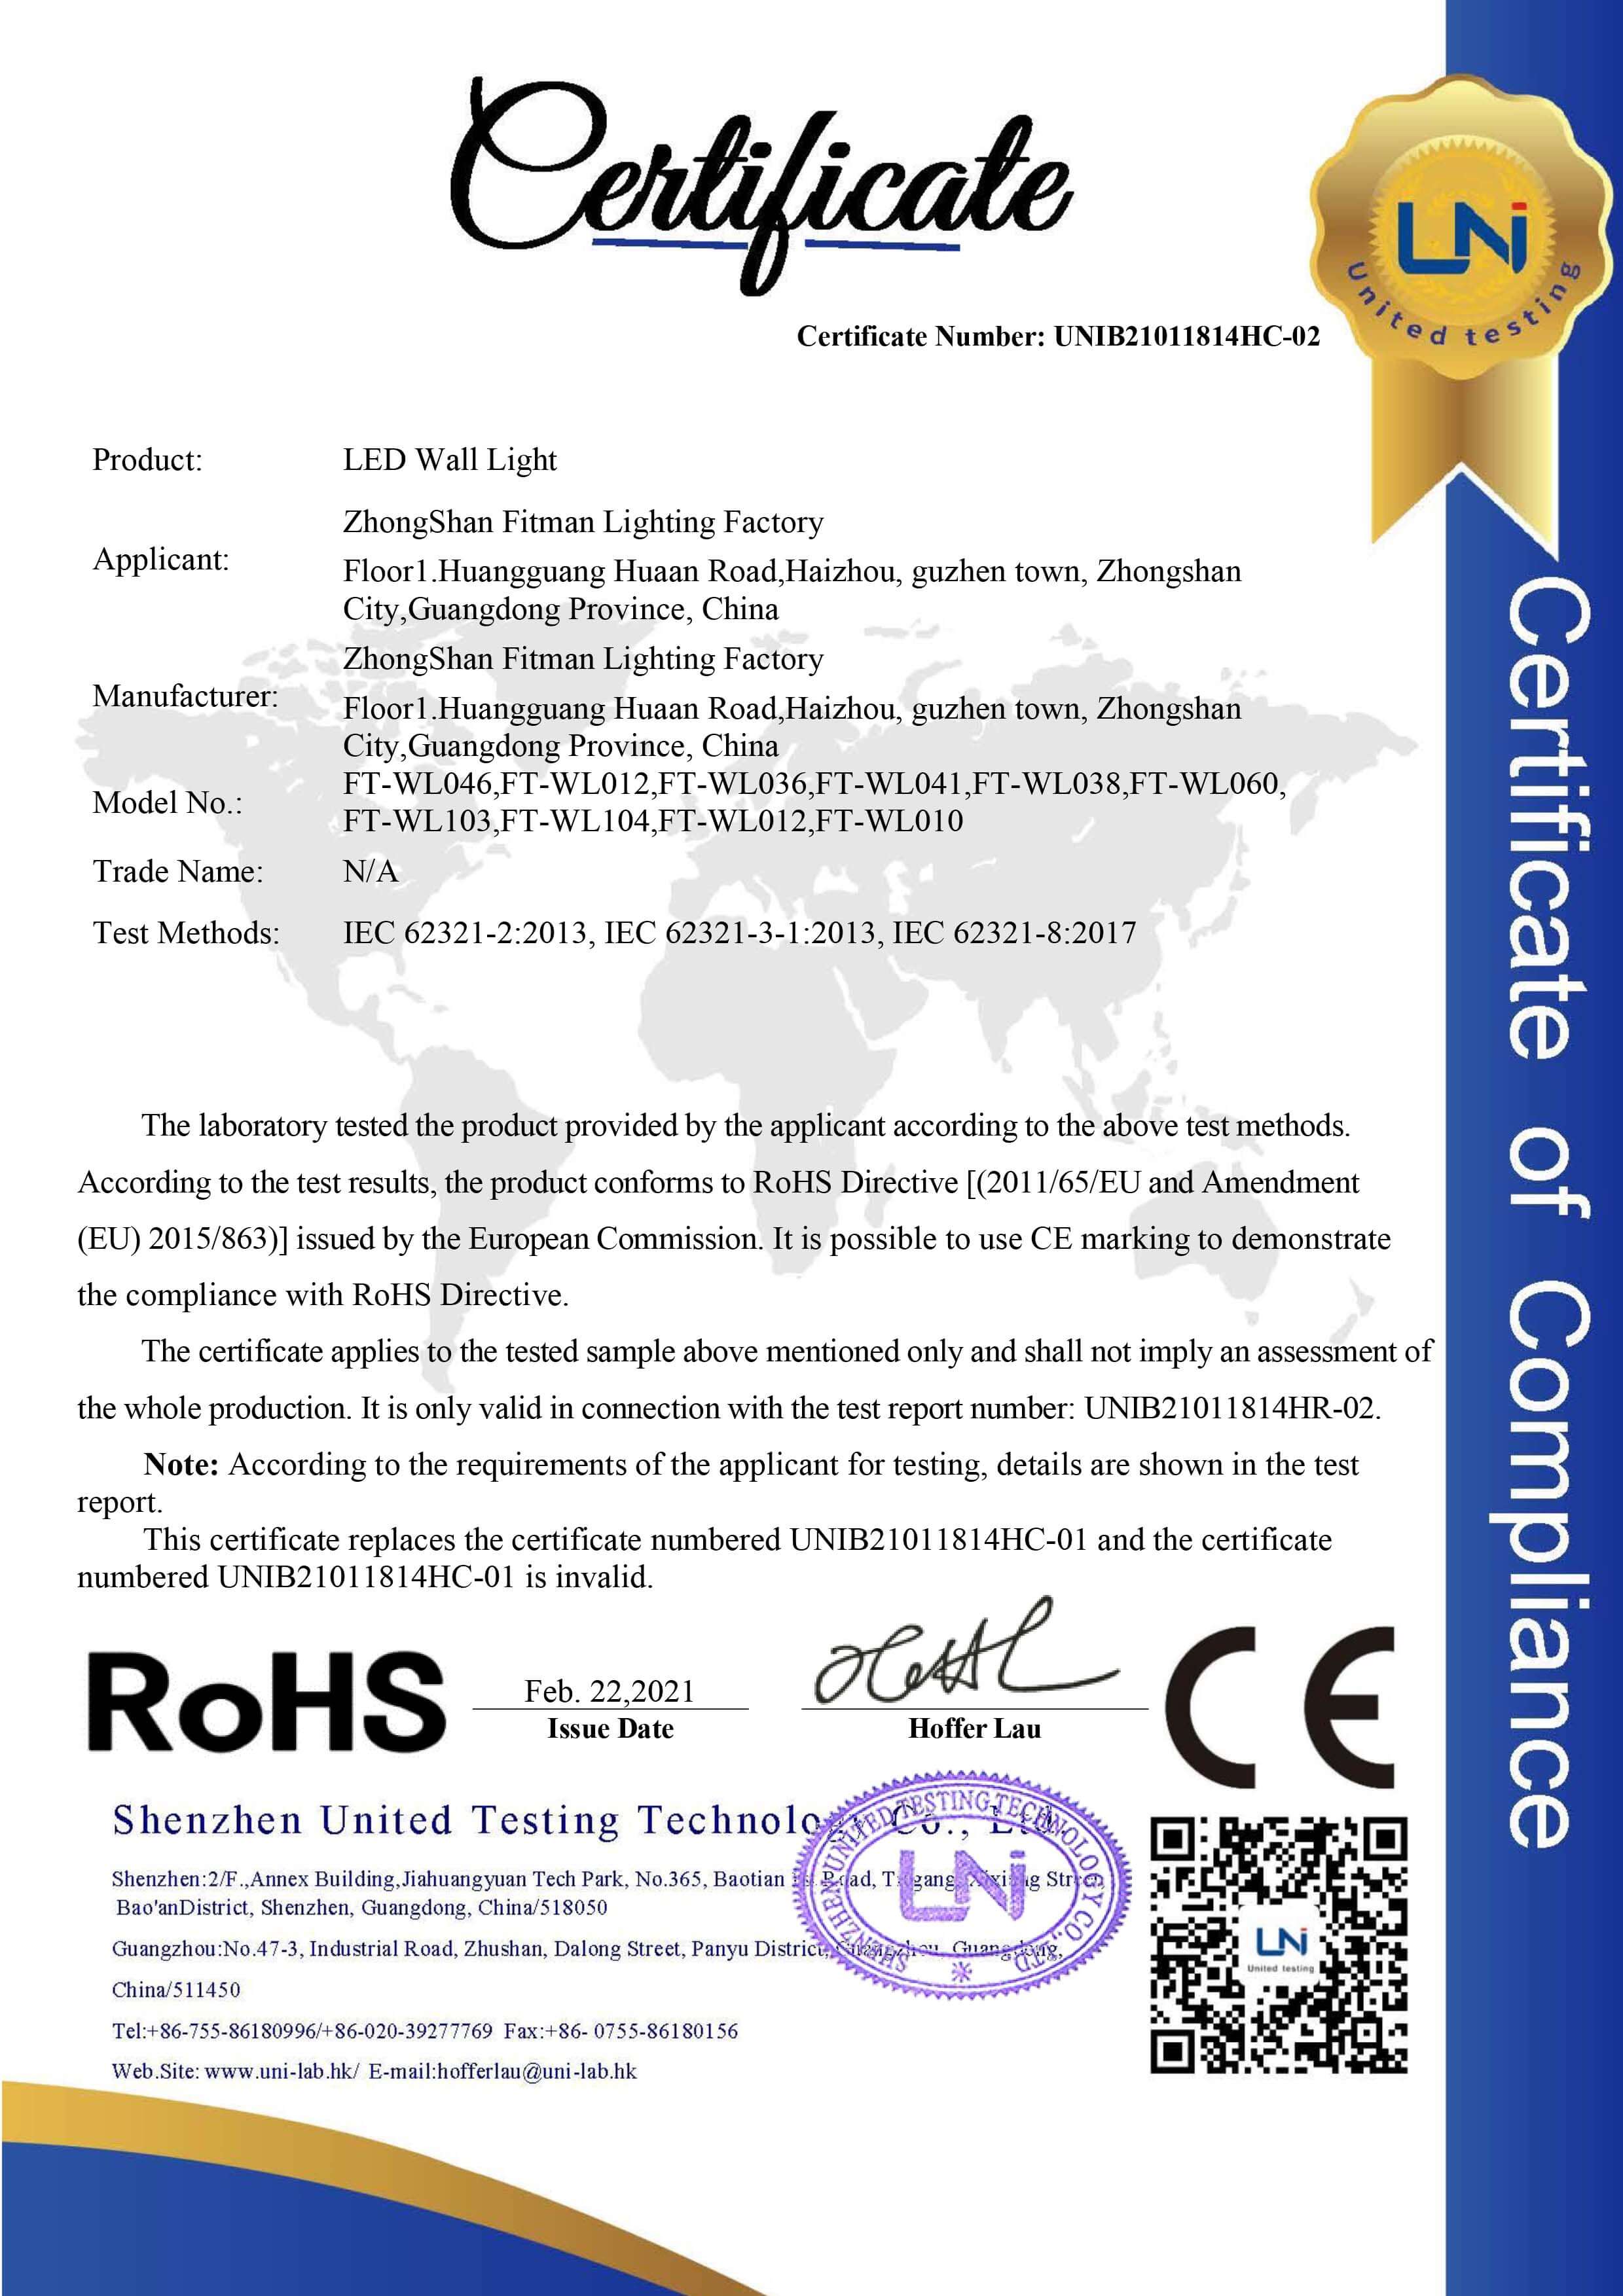 LED WALL light RoHS certificate